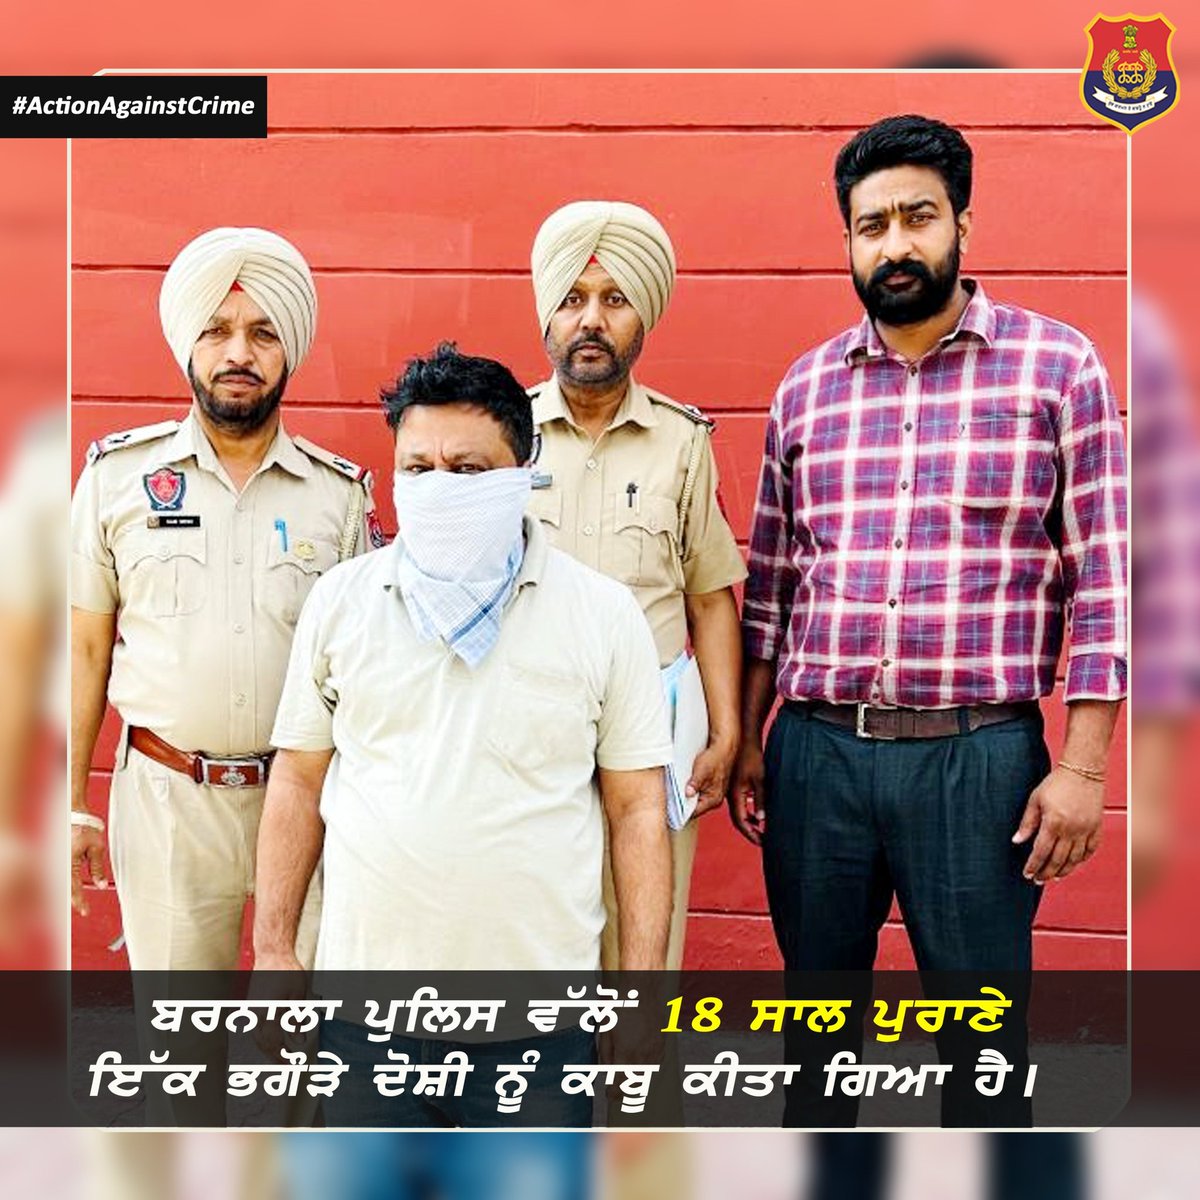 In the ongoing campaign against Proclaimed Offenders, one 18 (year old) PO was arrested by Barnala police.
#ActionAgainstCrime